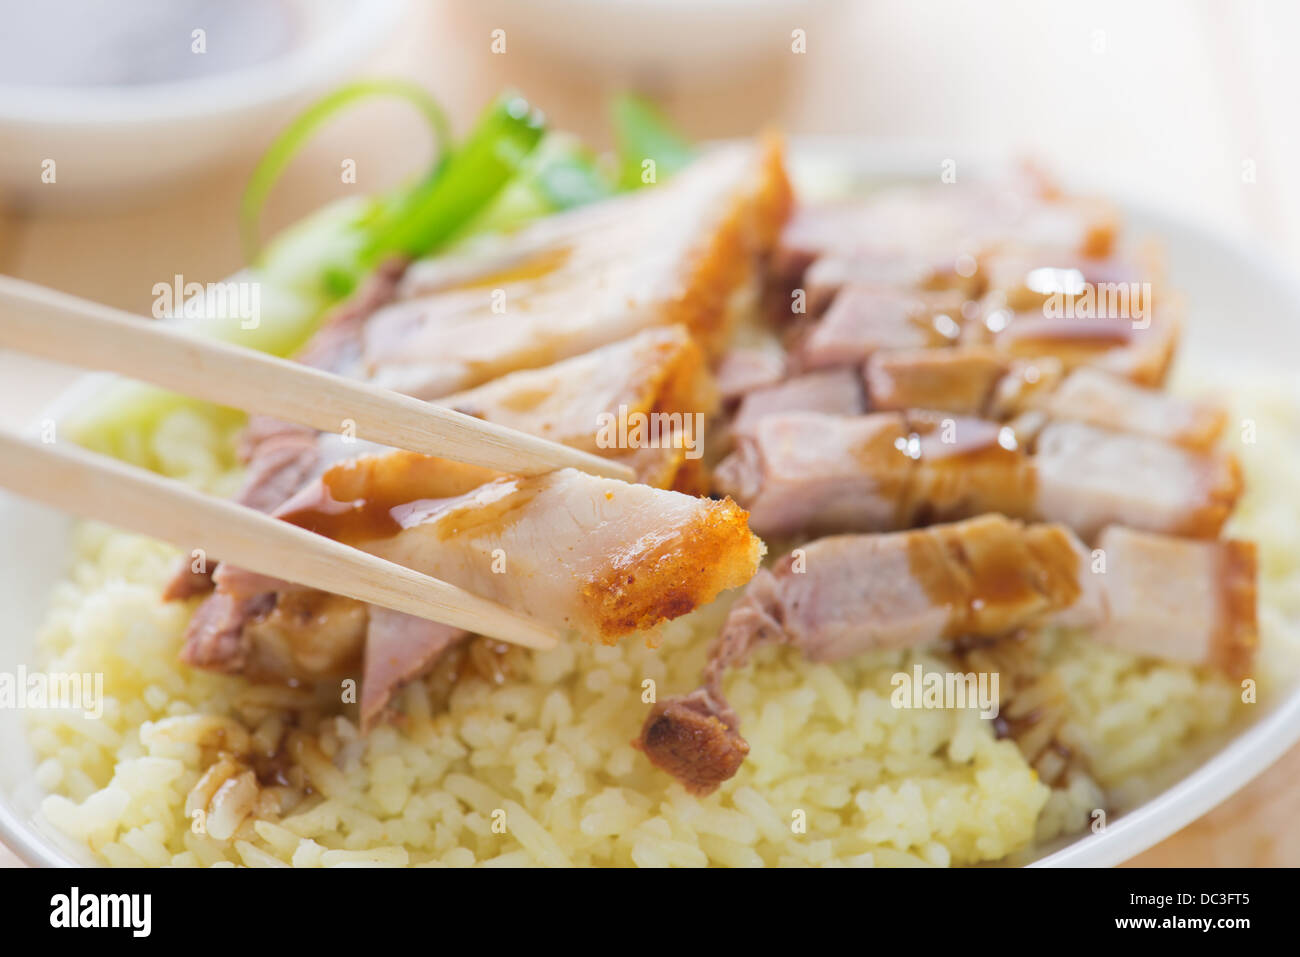 Siu Yuk - Chinese roasted pork served with soy and hoisin sauce. Hong Kong cuisine. Close up on meat and chopsticks. Stock Photo